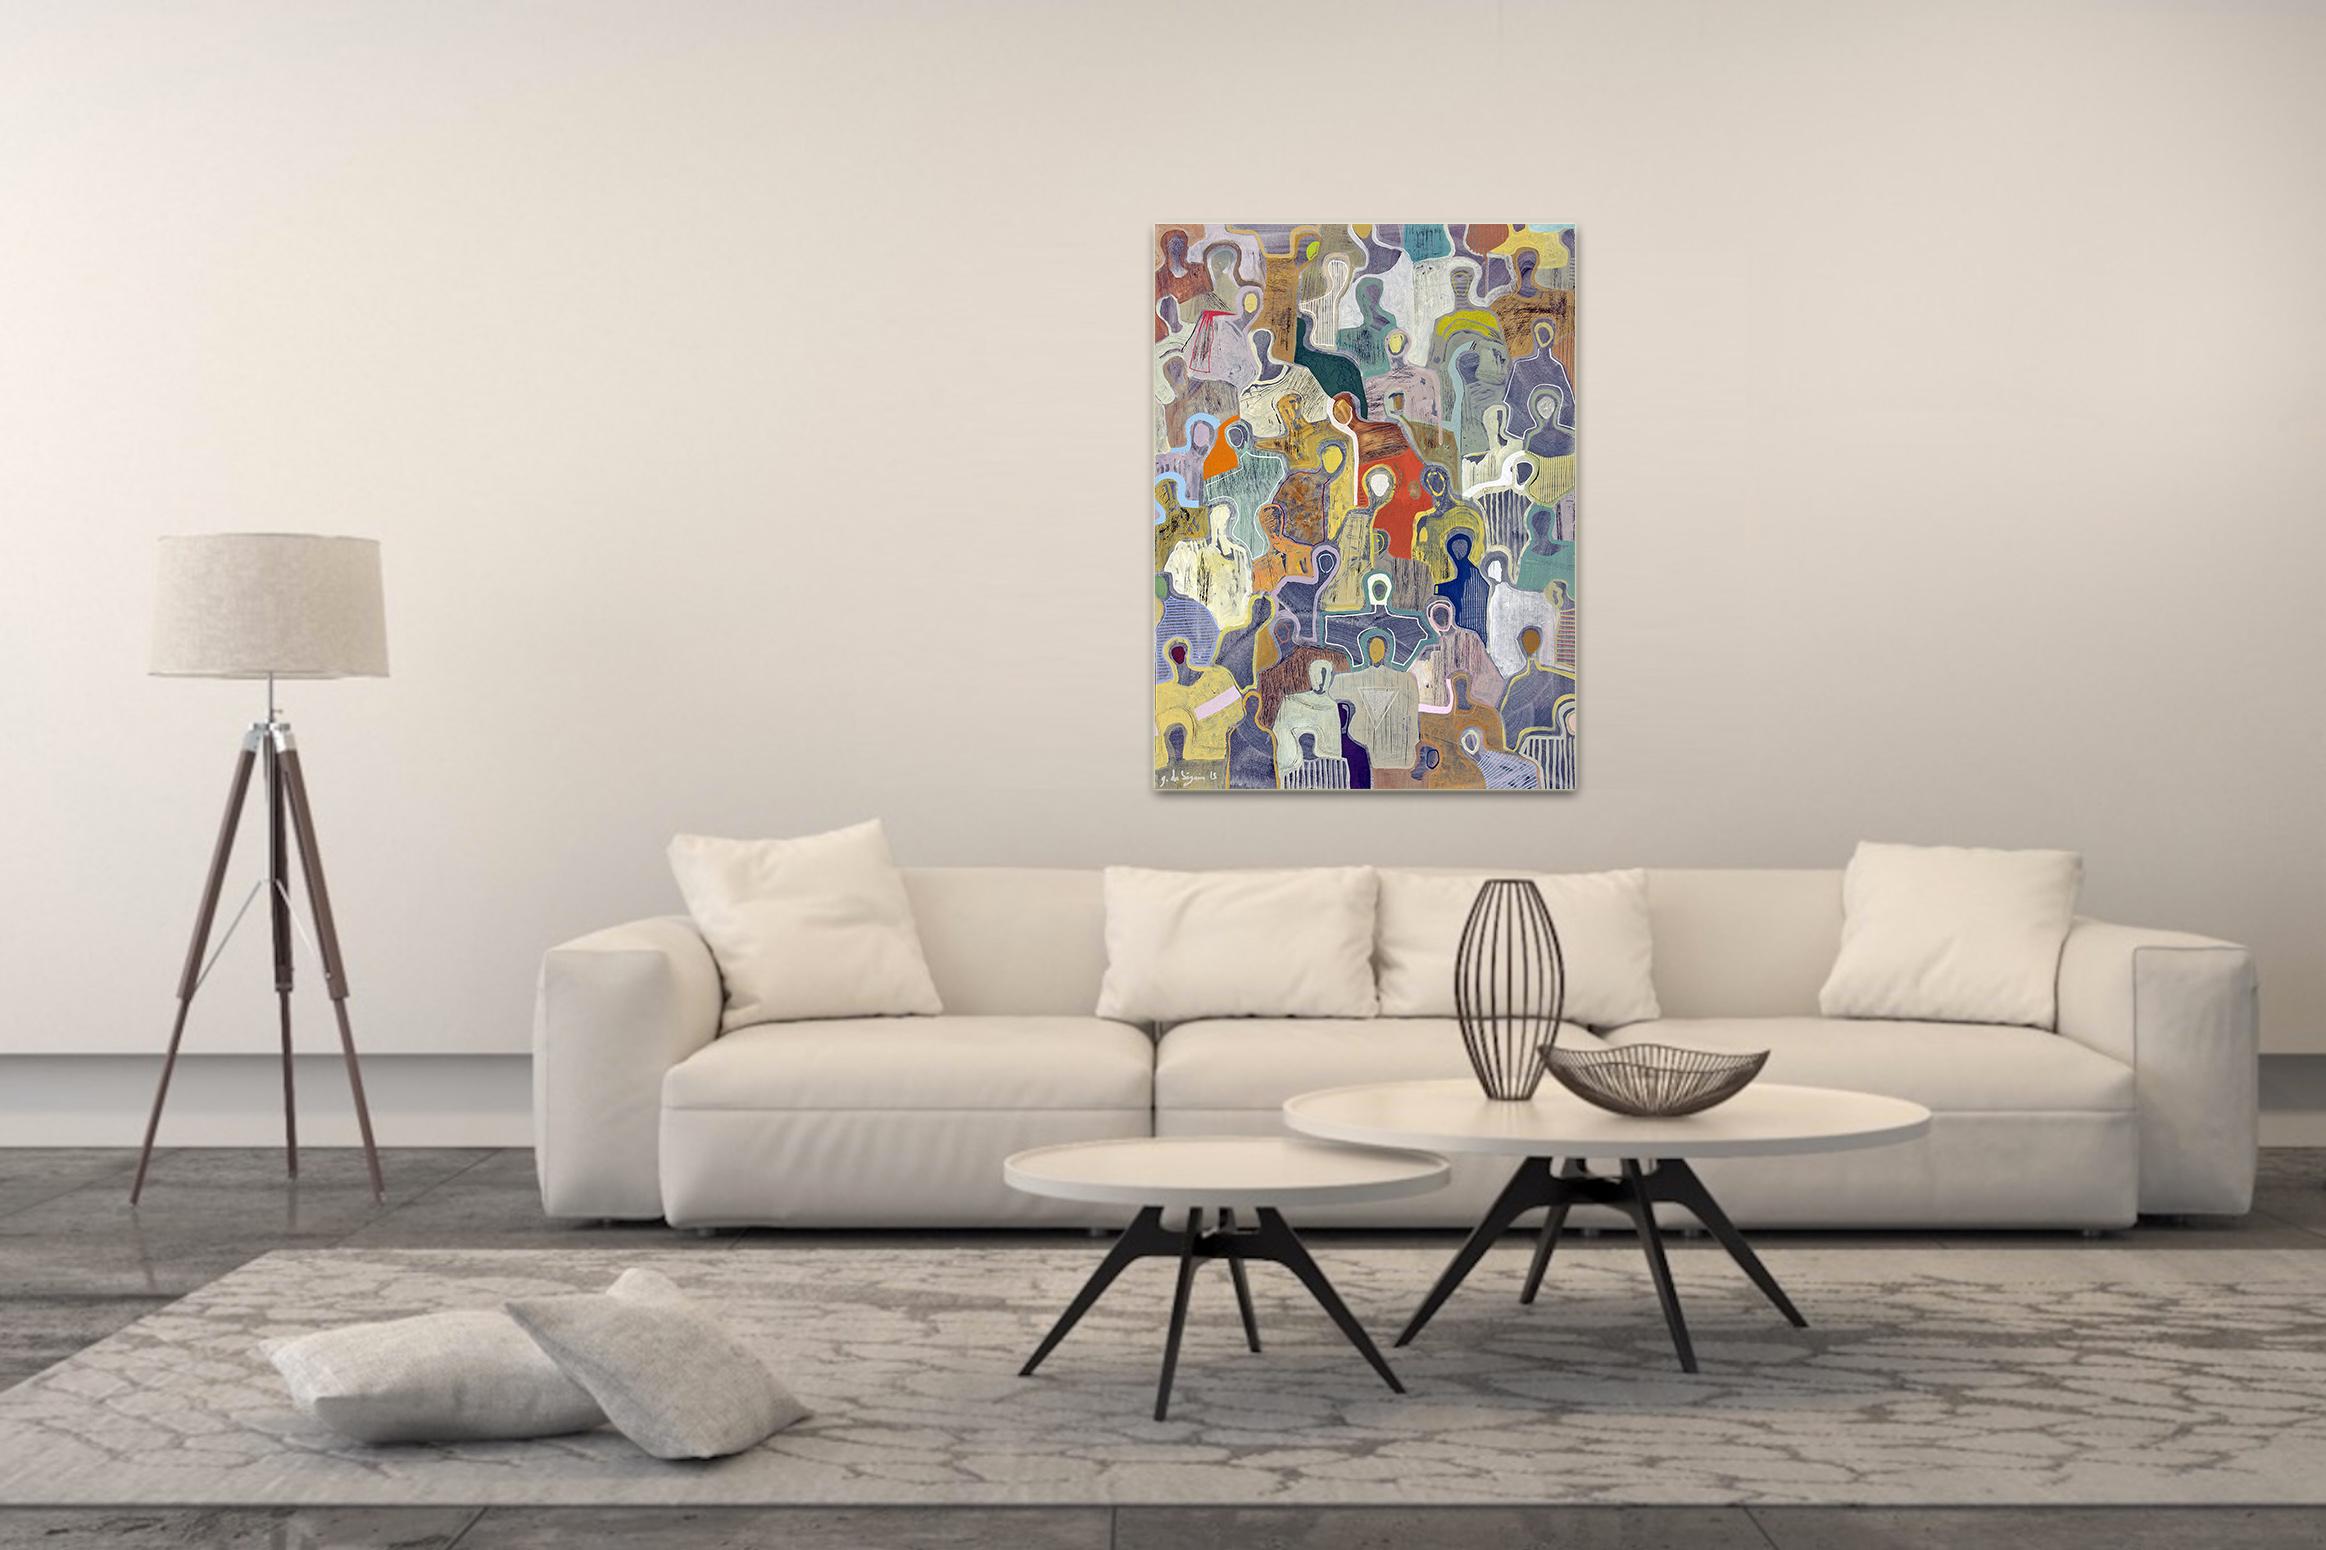 Summer of sounds by Gaetan de Seguin -colorful contemporary painting, abstract - Abstract Painting by Gaëtan de Seguin